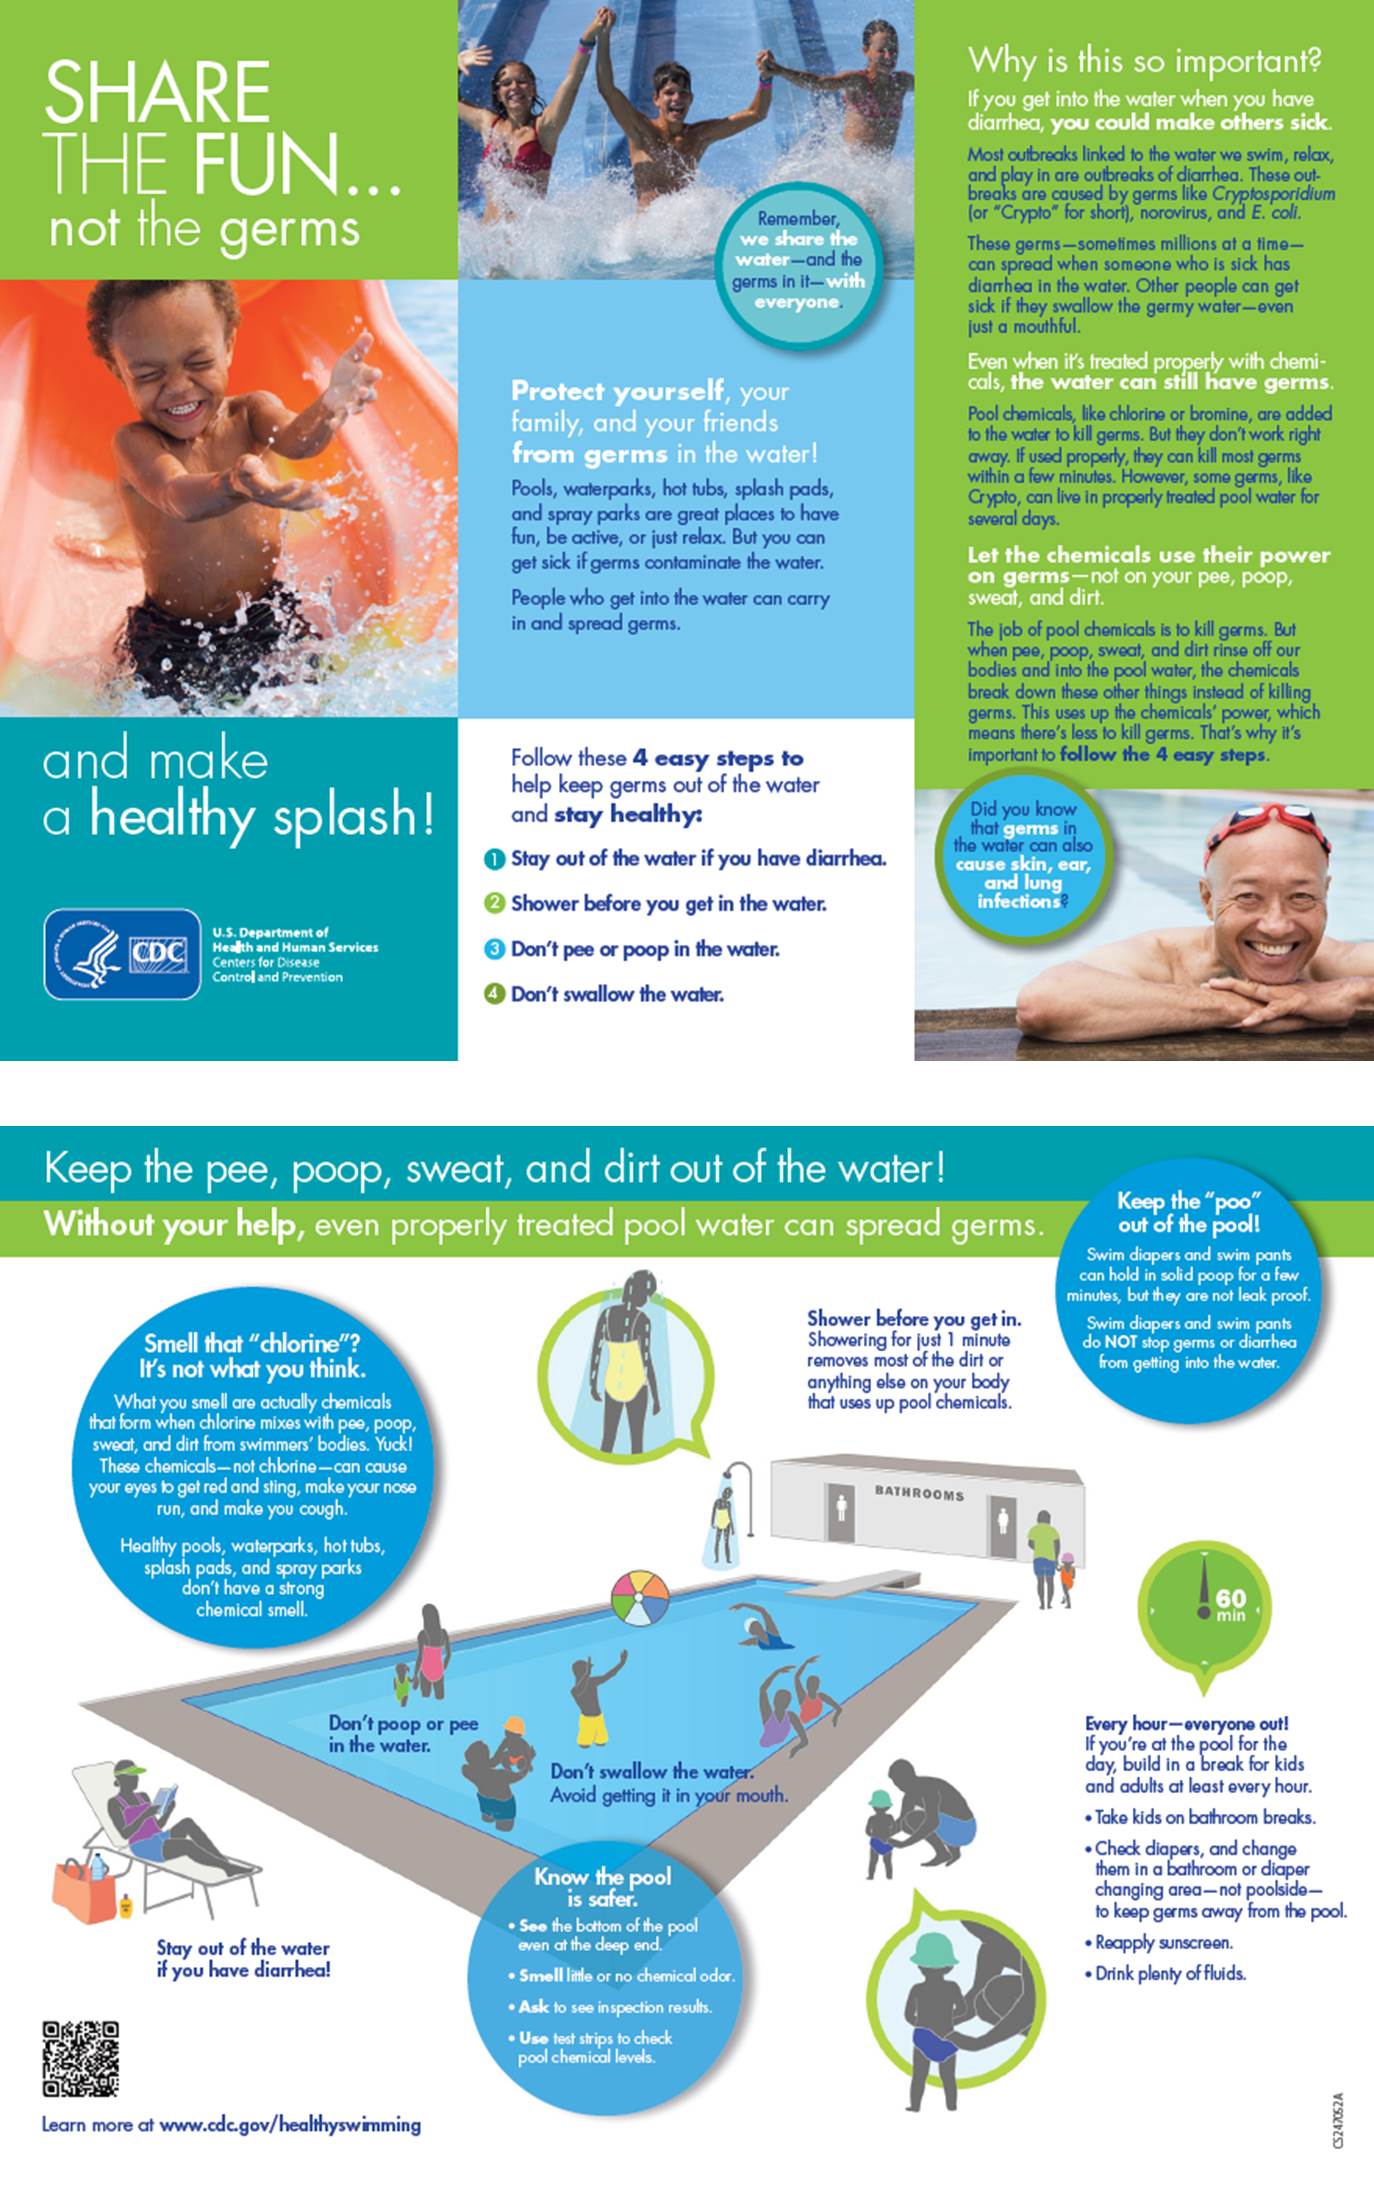 CDC Share the fun not the germs pool hygiene brochure in English